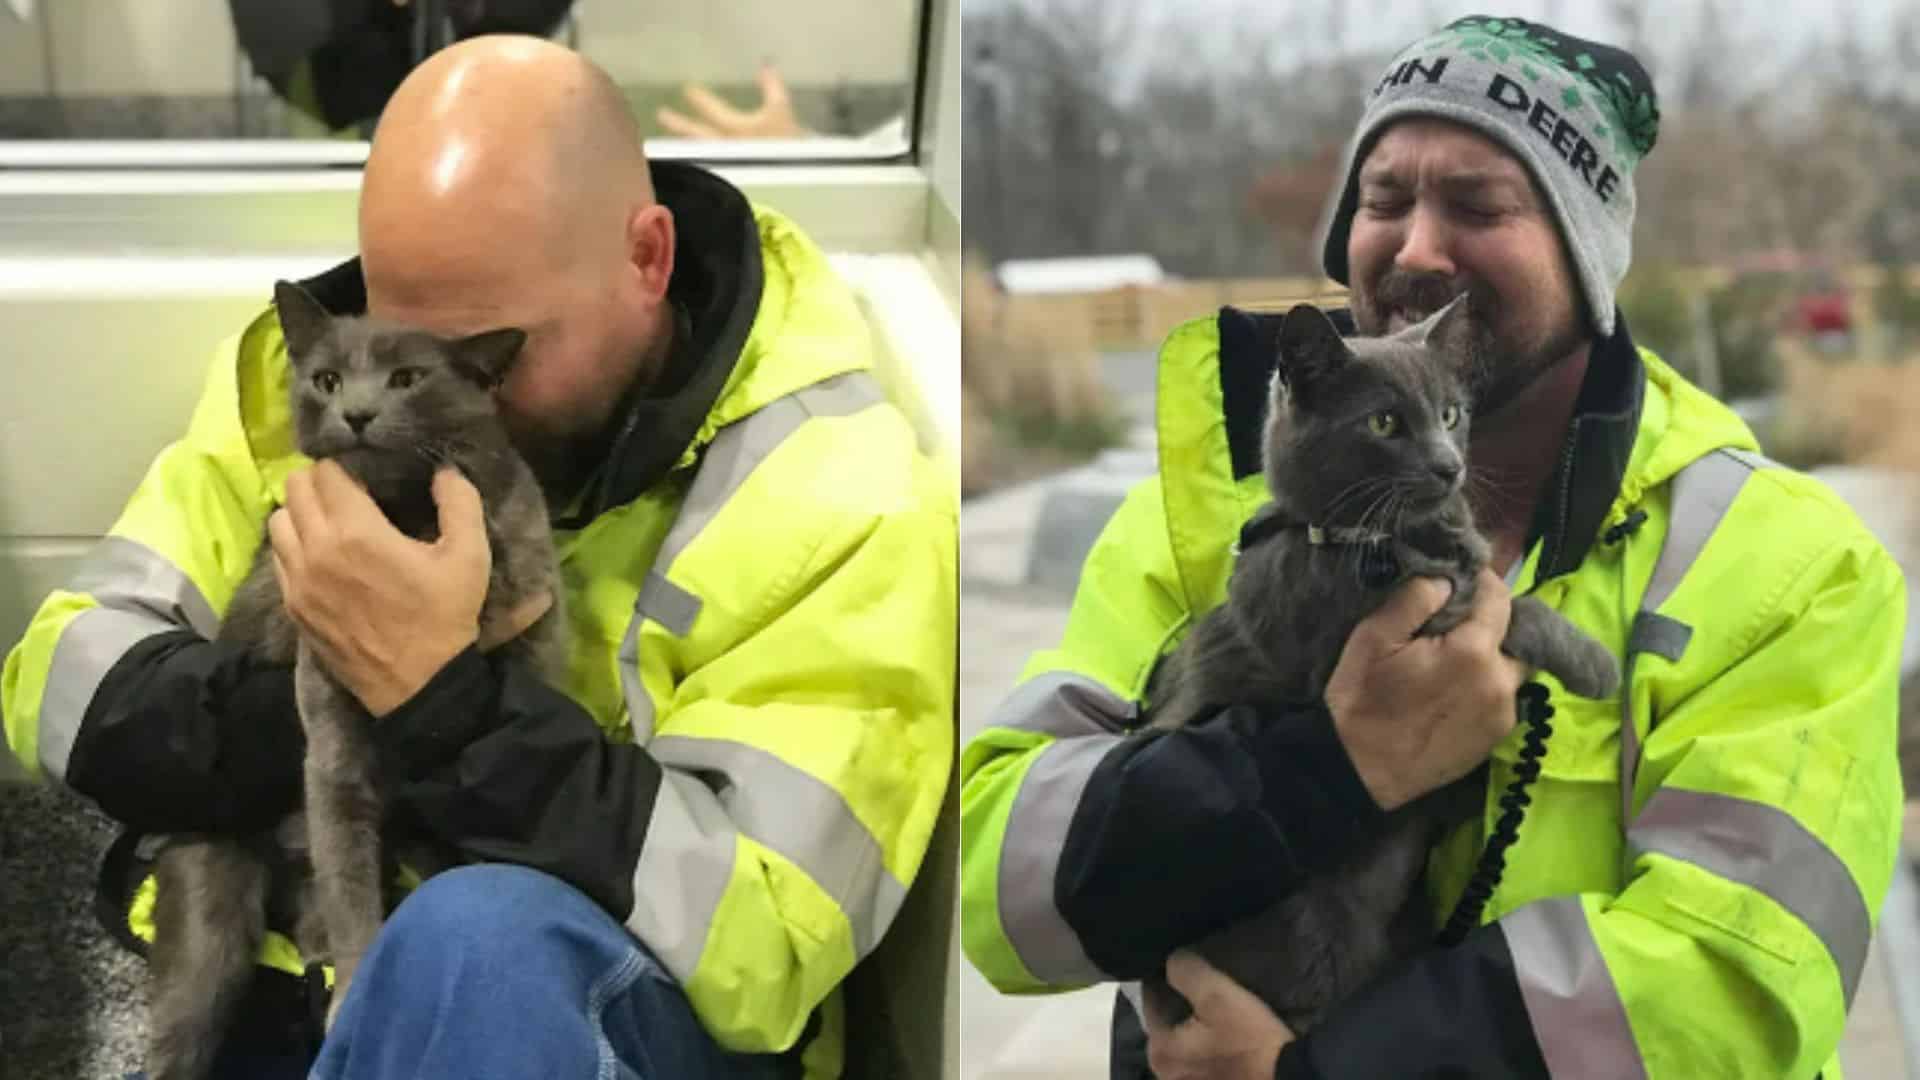 A truck driver broke down in tears after meeting his cat